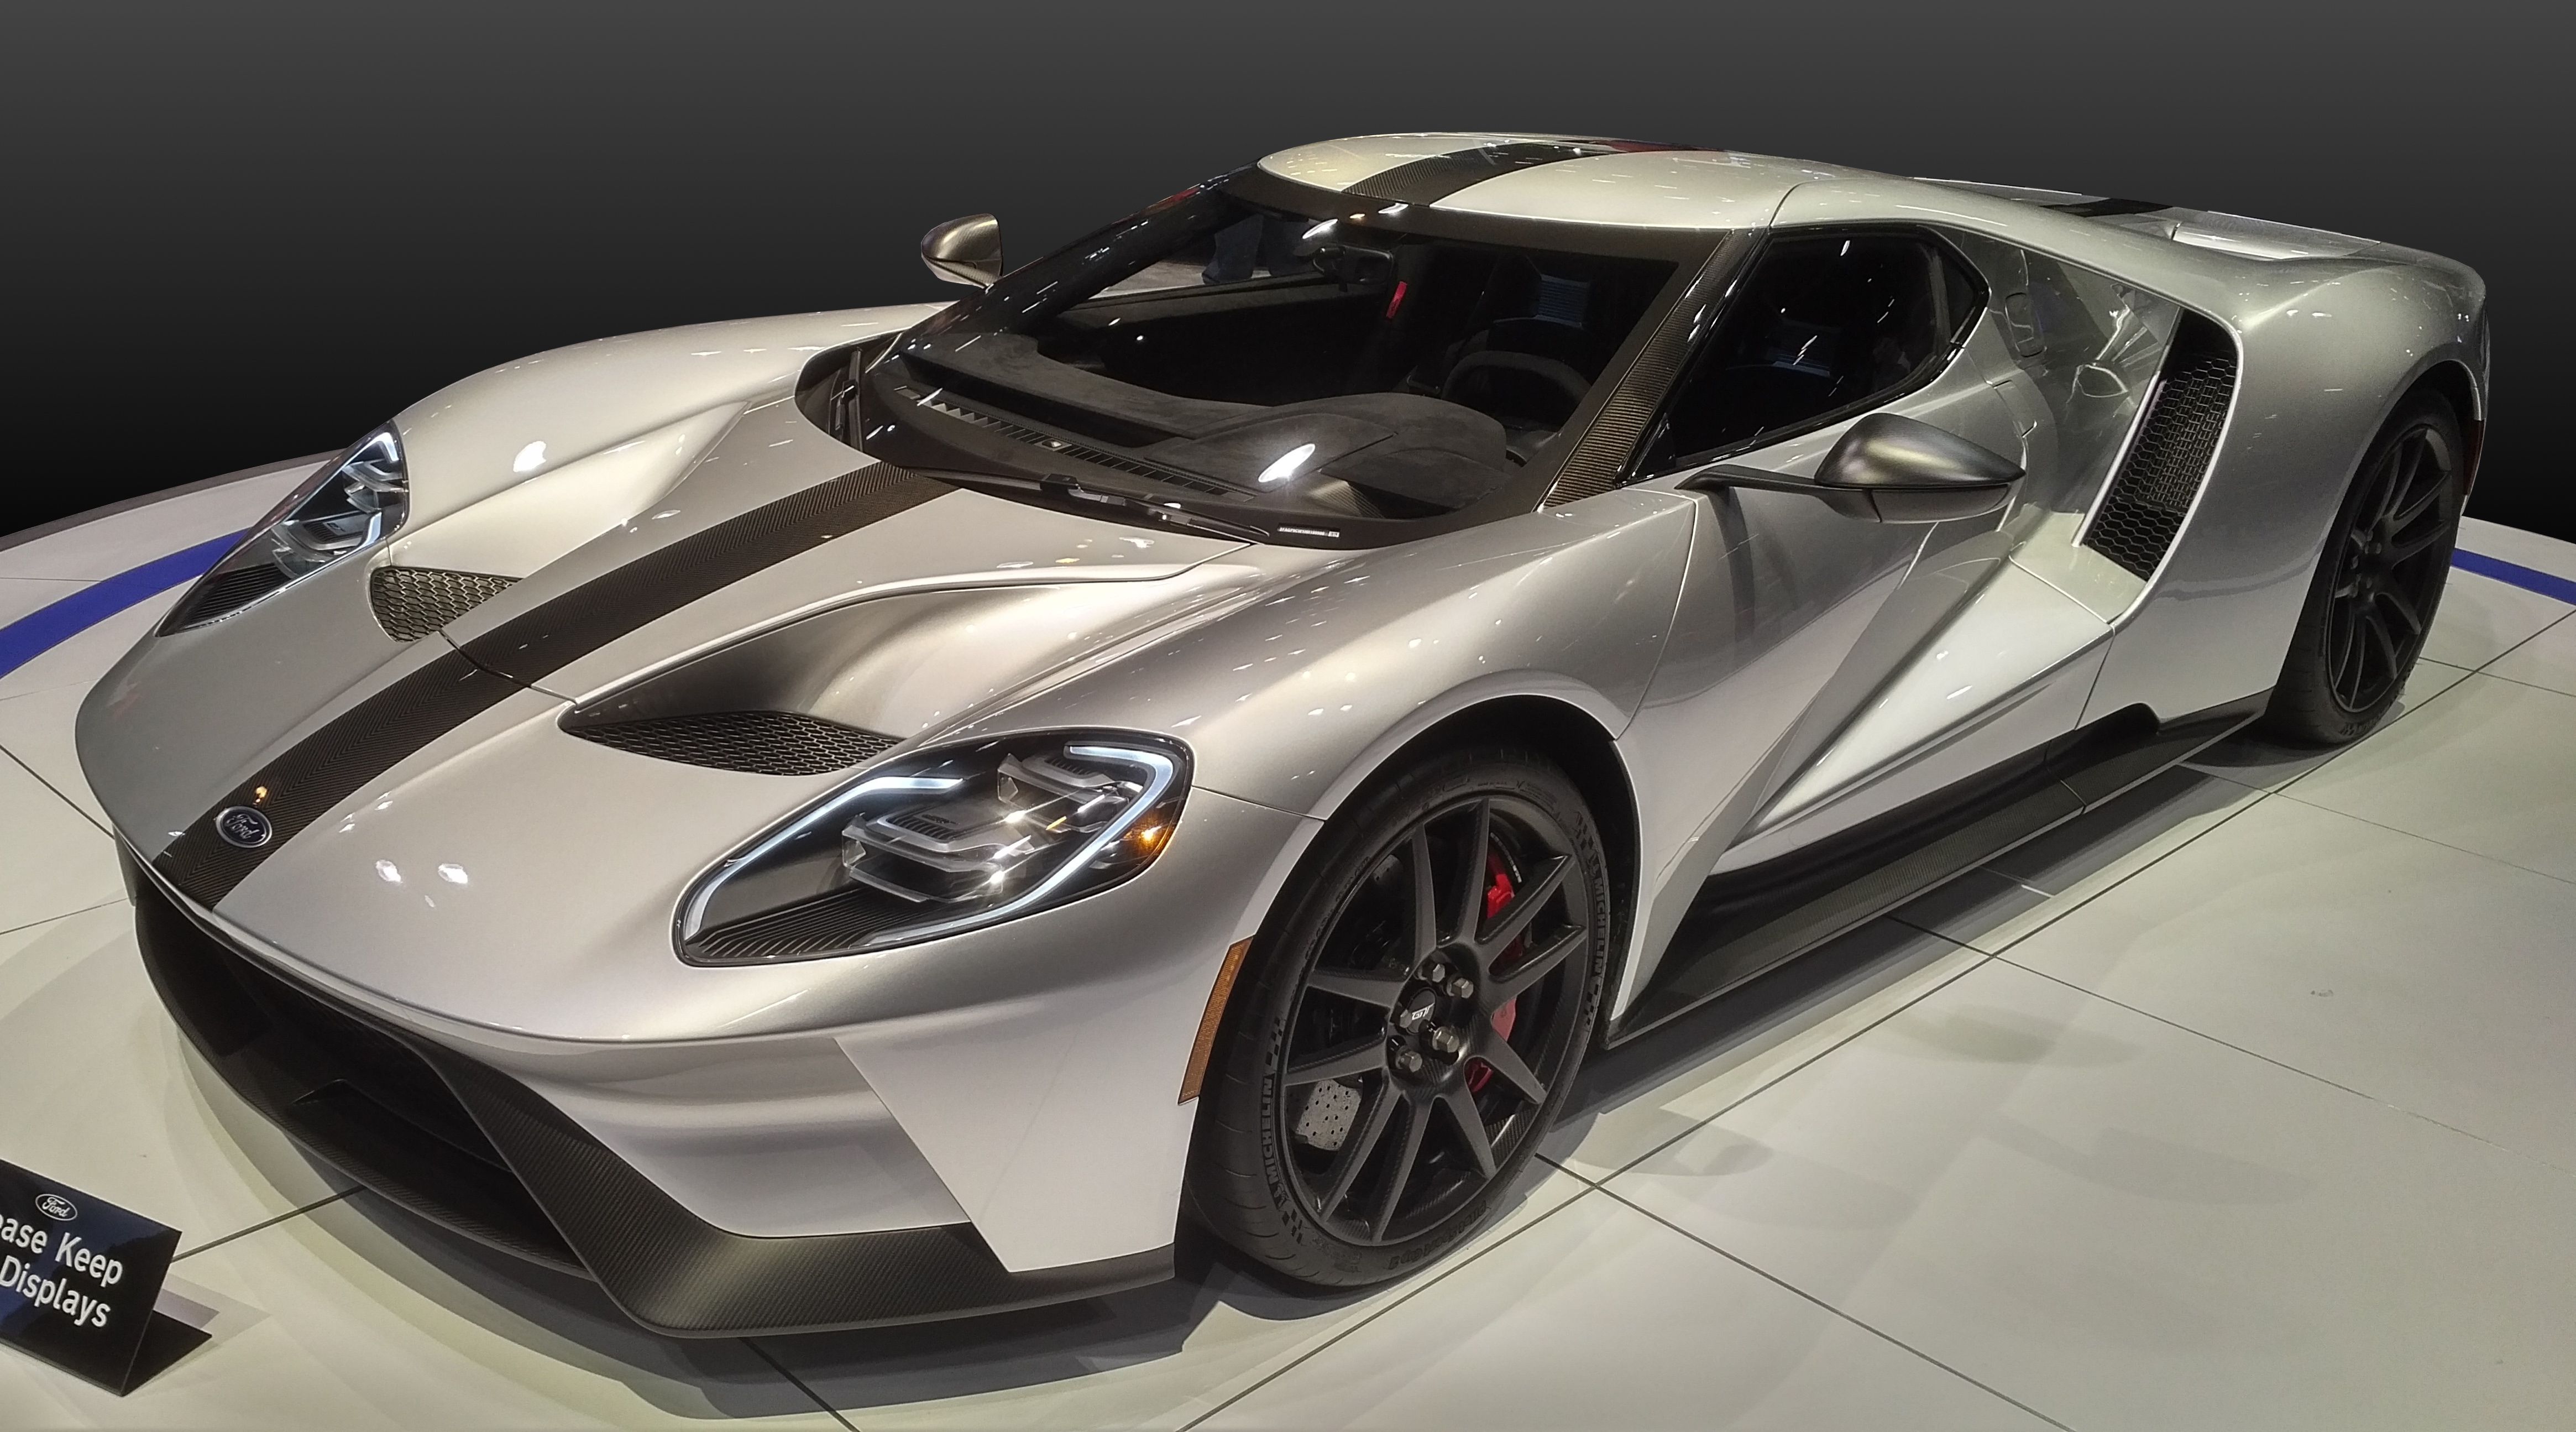 Silver Ford GT on display